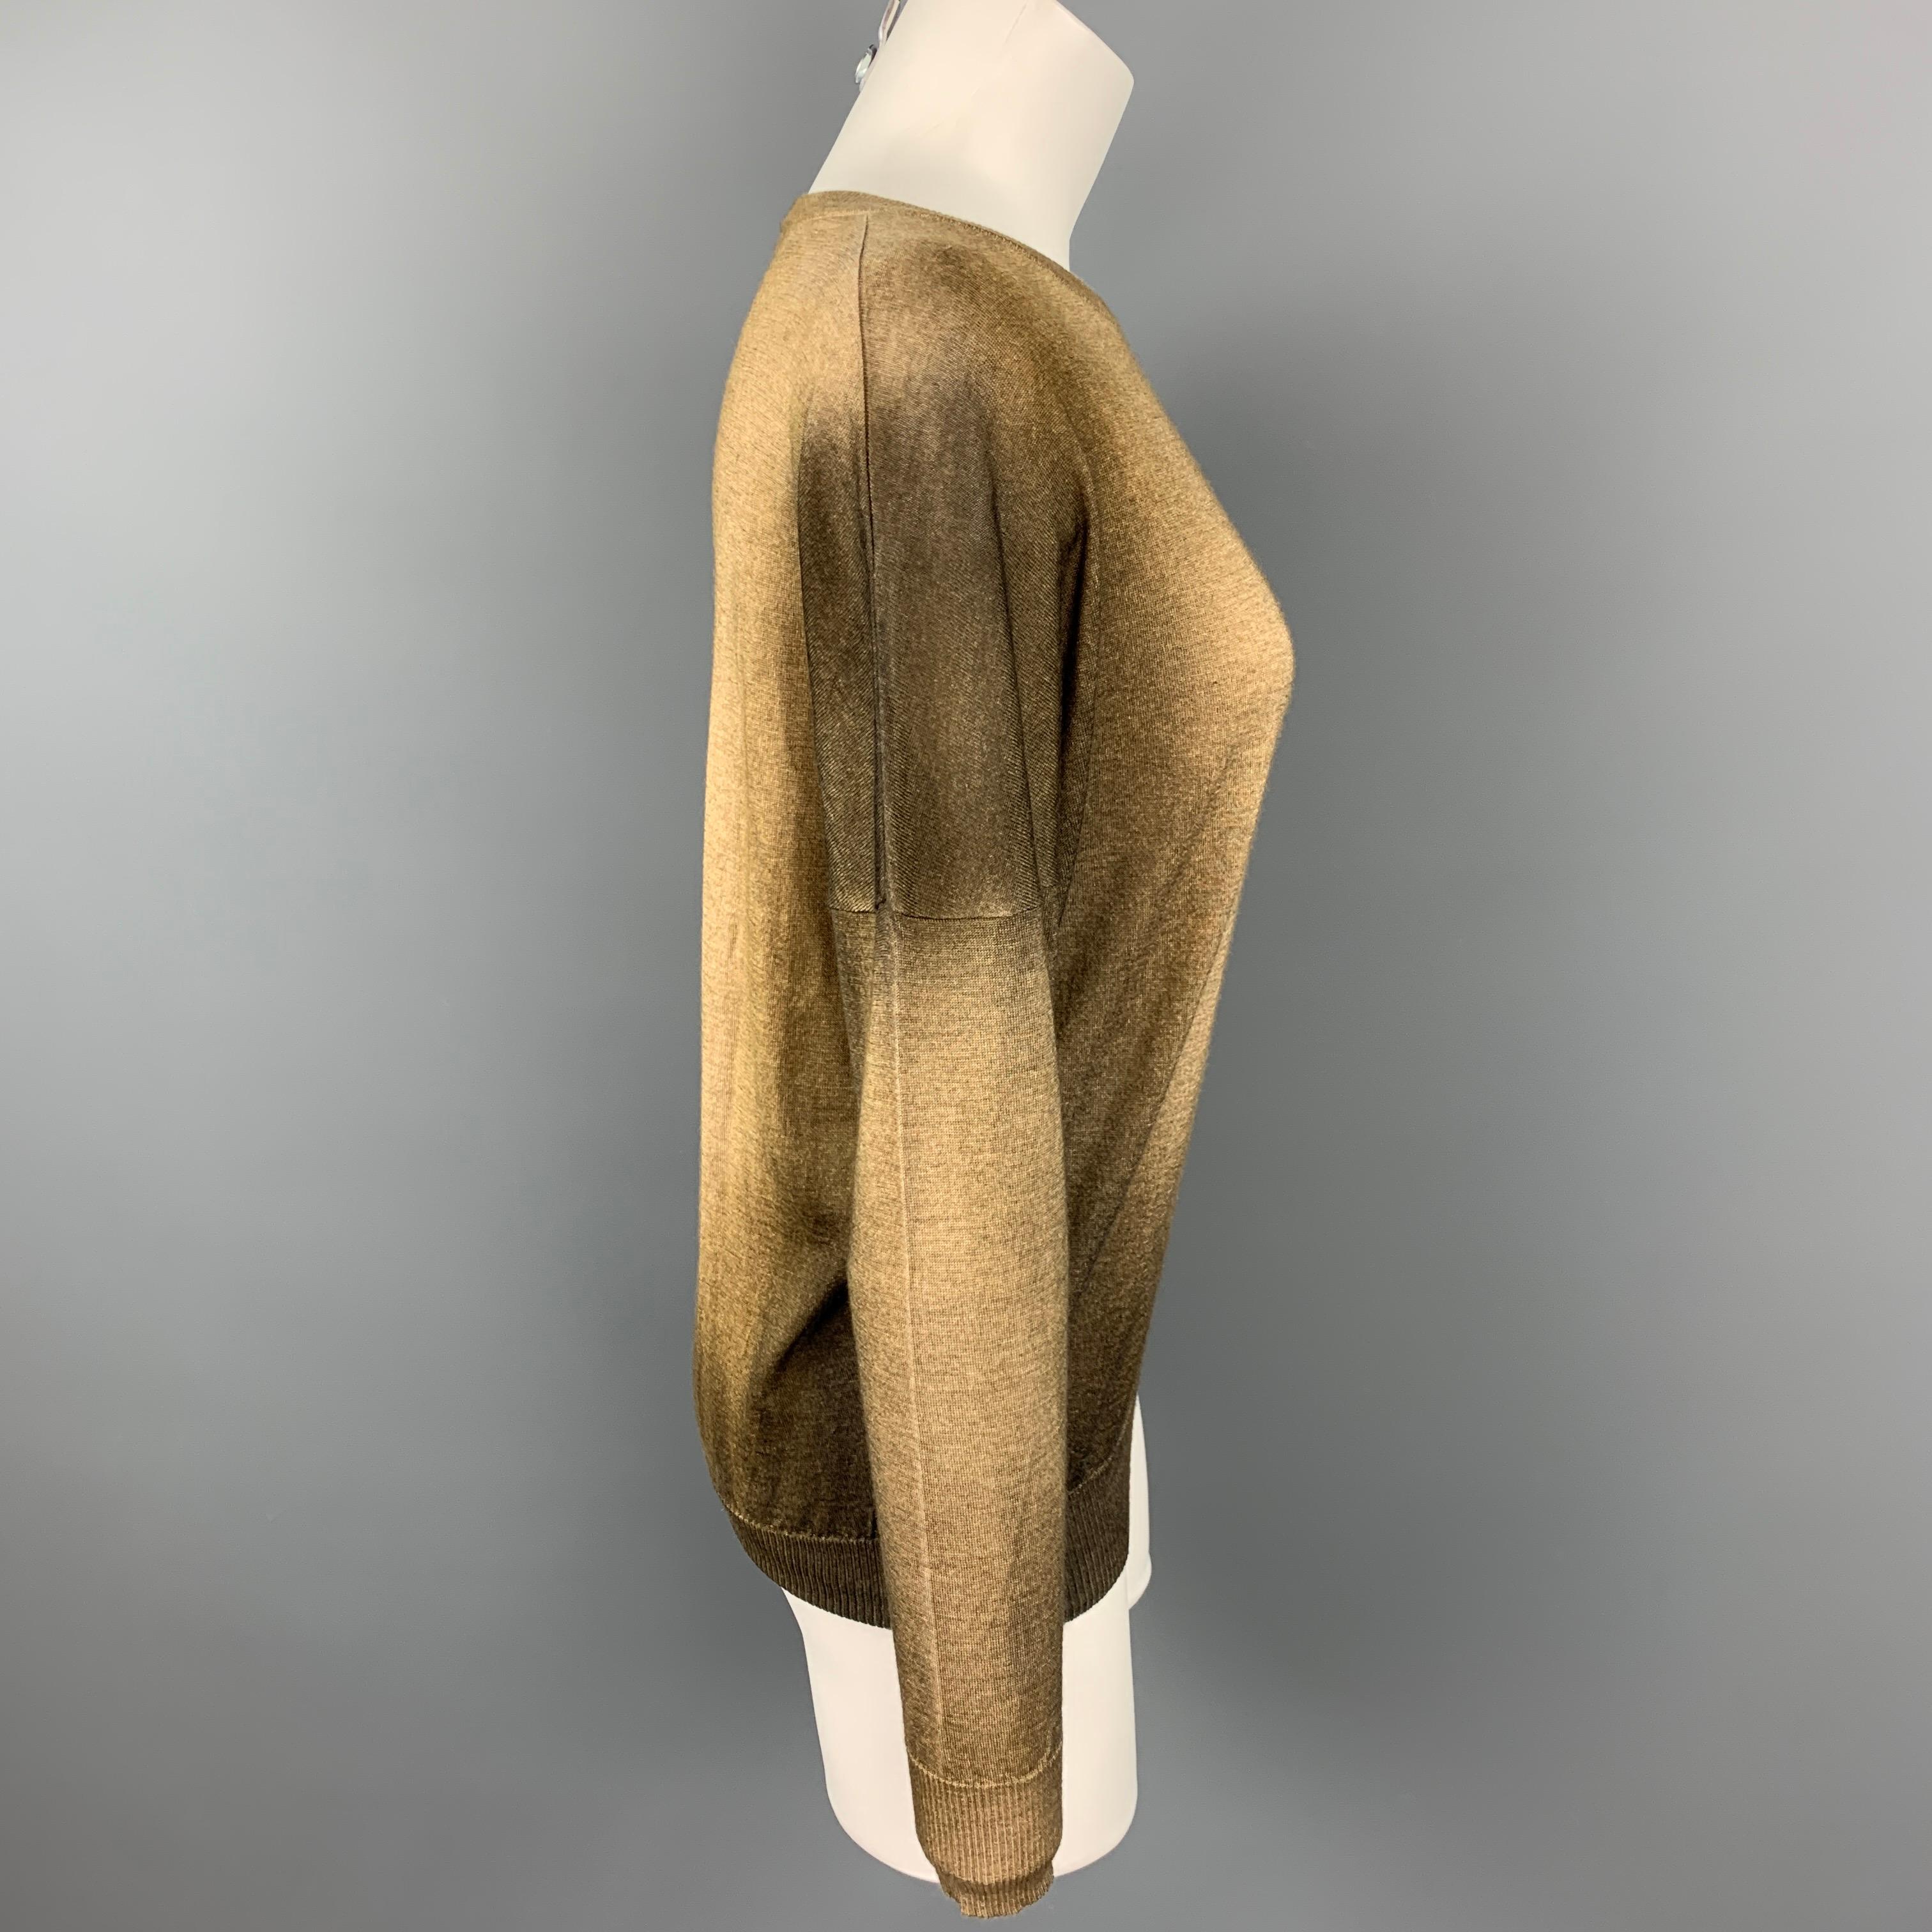 AVANT TOI pullover comes in a brown & tan ombre cashmere / silk featuring a crew-neck. 

Very Good Pre-Owned Condition.
Marked: 38
Original Retail Price: $620.00

Measurements:

Shoulder: 18 in.
Bust: 46 in.
Sleeve: 17 in.
Length: 24.5 in.

